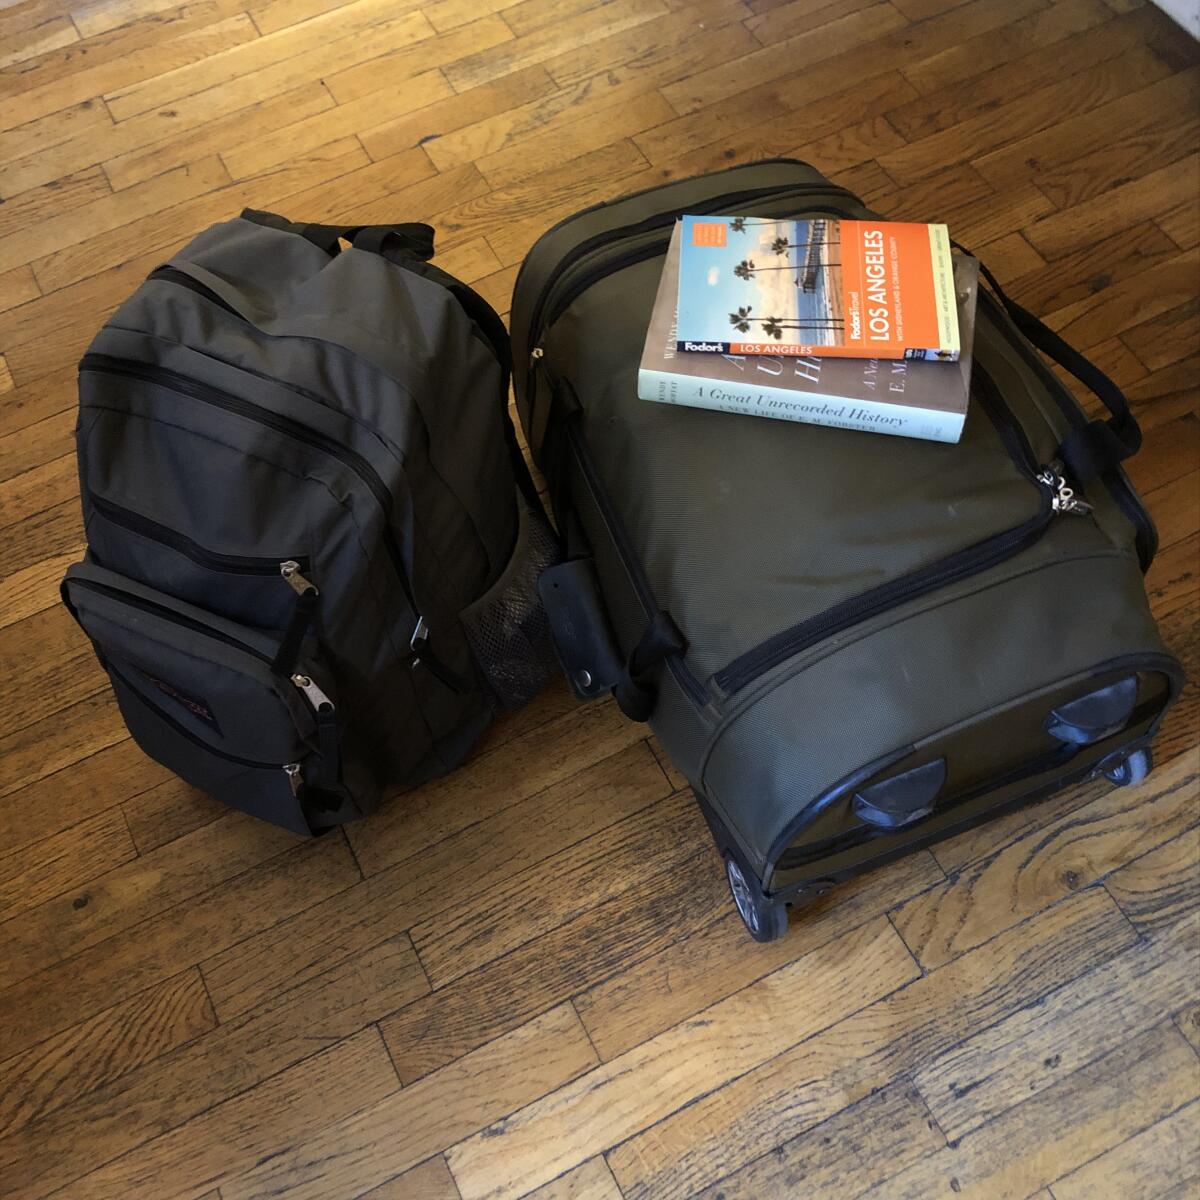 The key to moving from Airbnb to Airbnb is traveling light. For six months, the author lived out of a small suitcase and a large backpack.